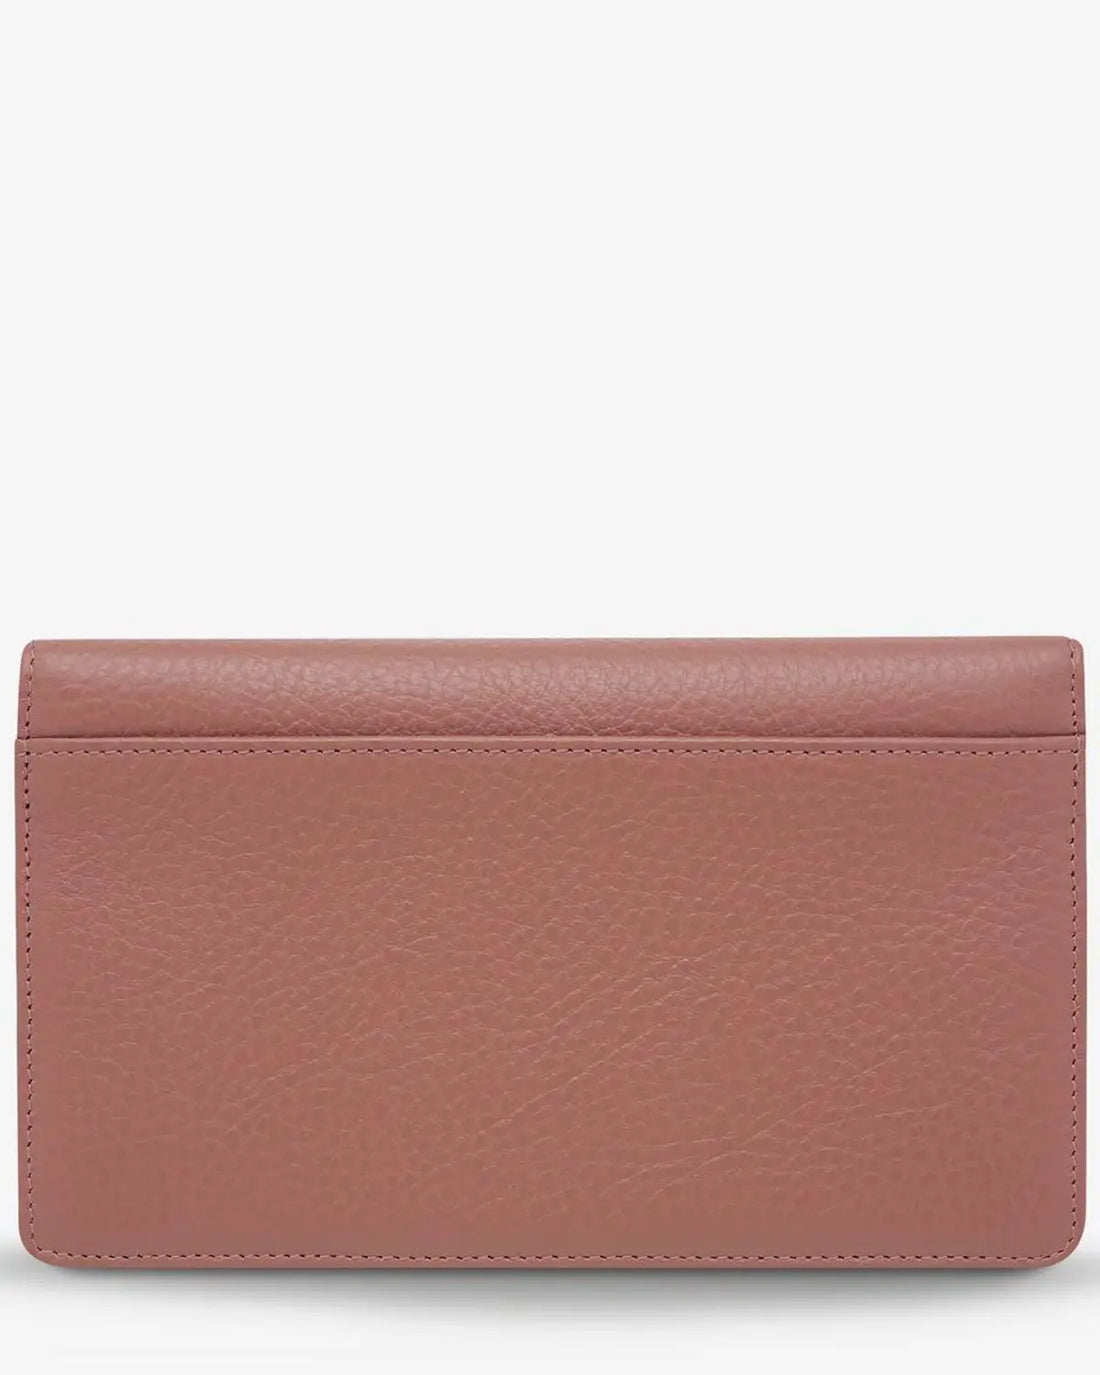 Status Anxiety Living Proof Leather Wallet - Dusty Rose ✨